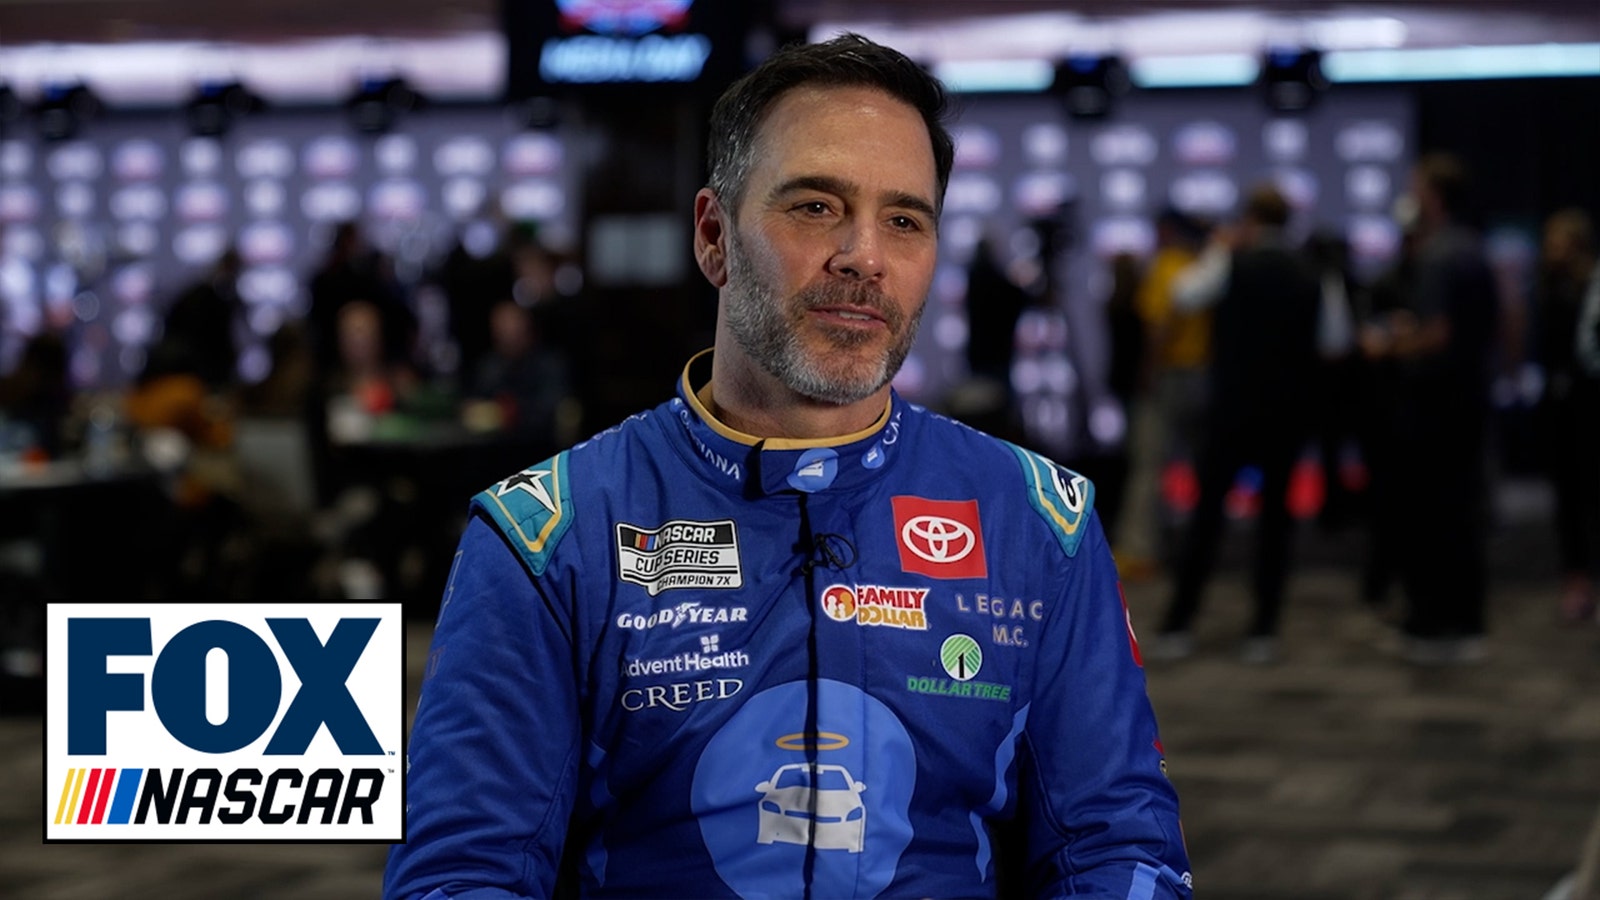 Jimmie Johnson on why he's racing in the Daytona 500 